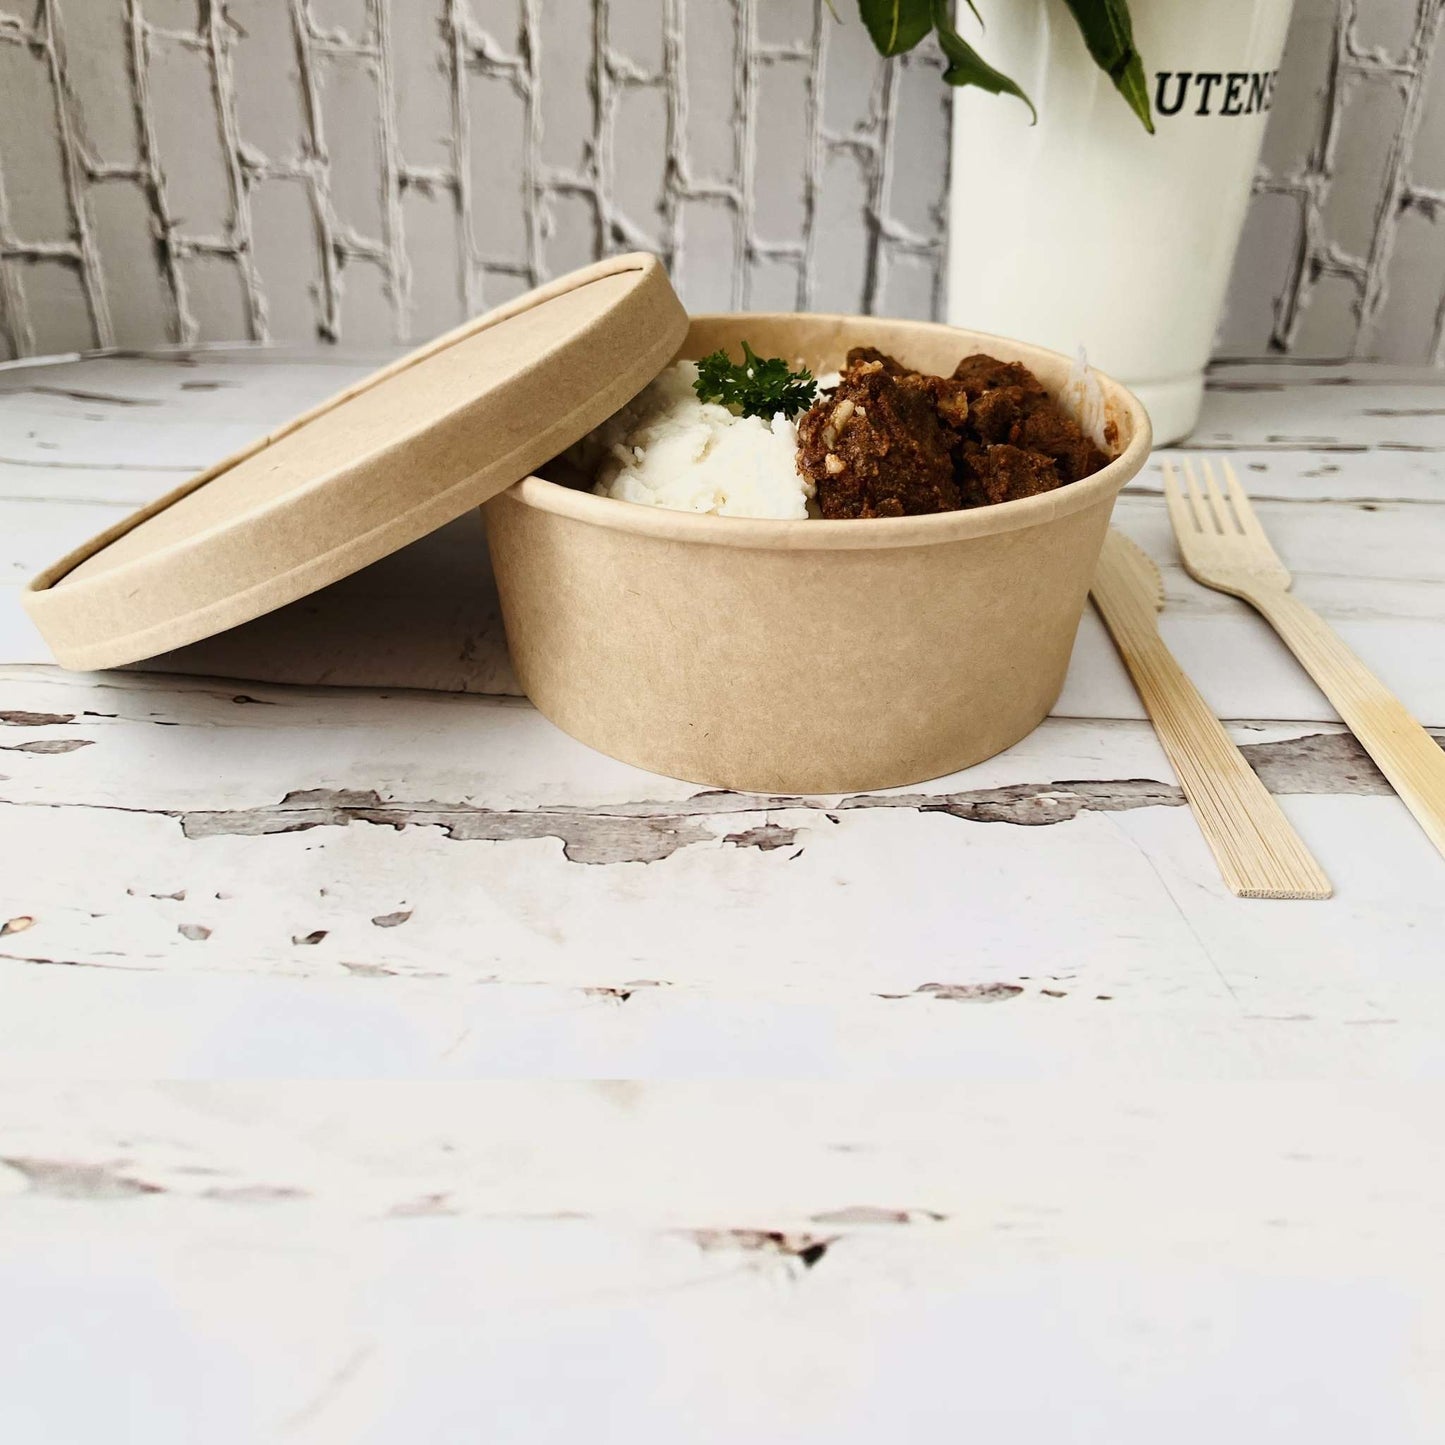 1100 ml Biodegradable Kraft Paper Shallow Salad Container